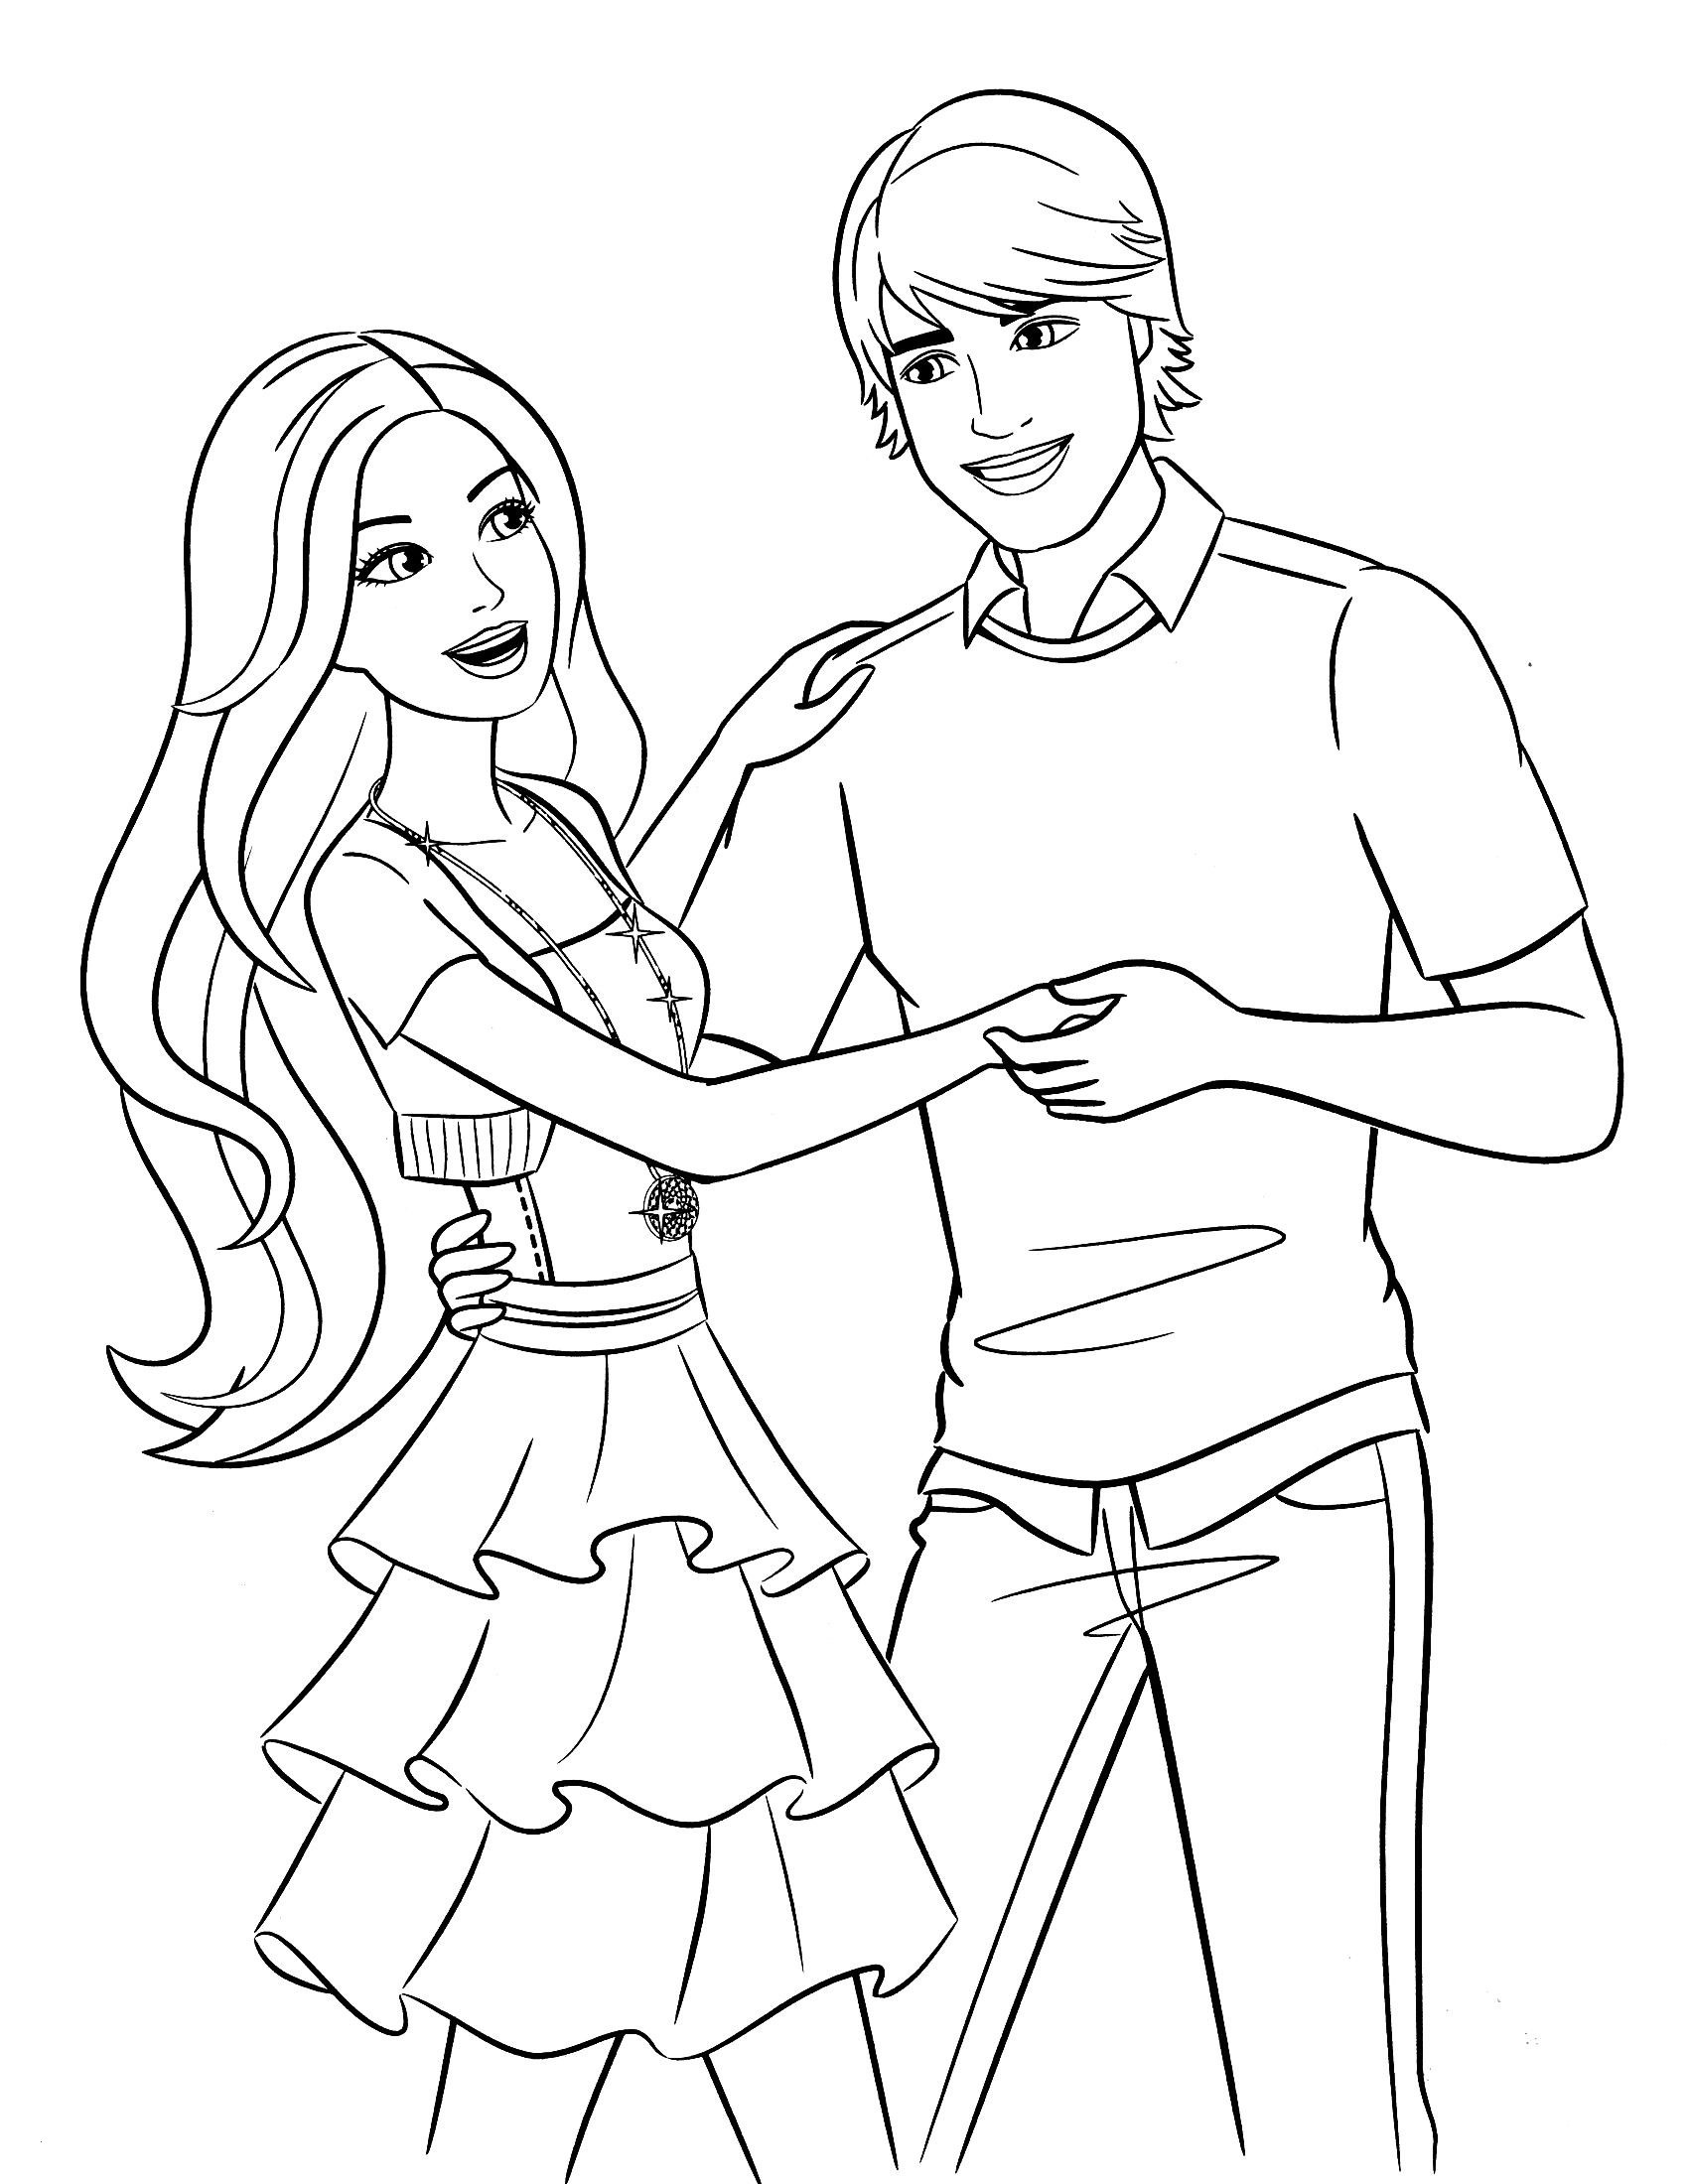 Coloring Book Barbie Awesome Barbie and Ken Coloring Pages Free Download